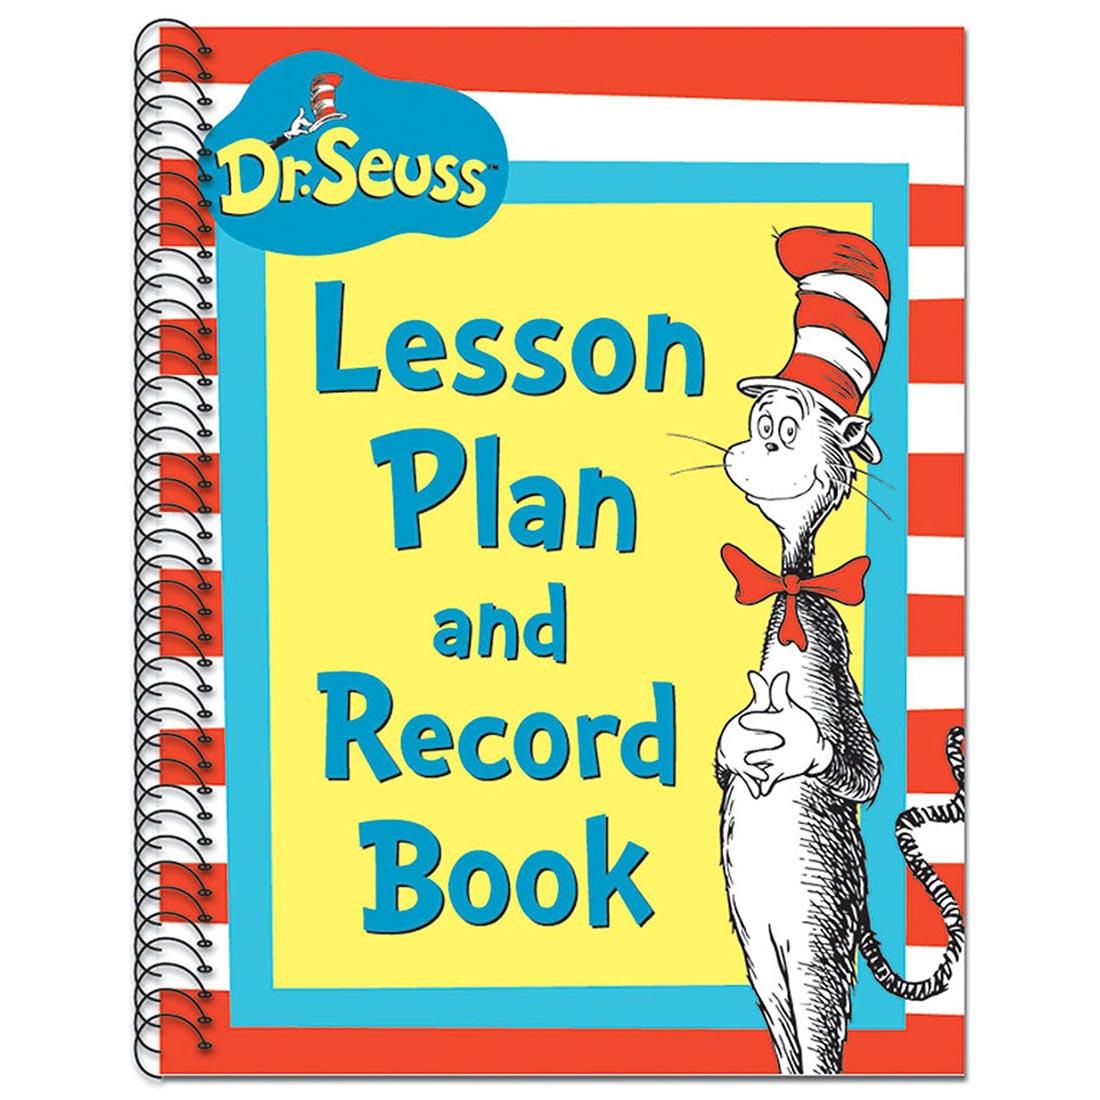 Dr. Seuss Lesson Plan and Record Book by Eureka